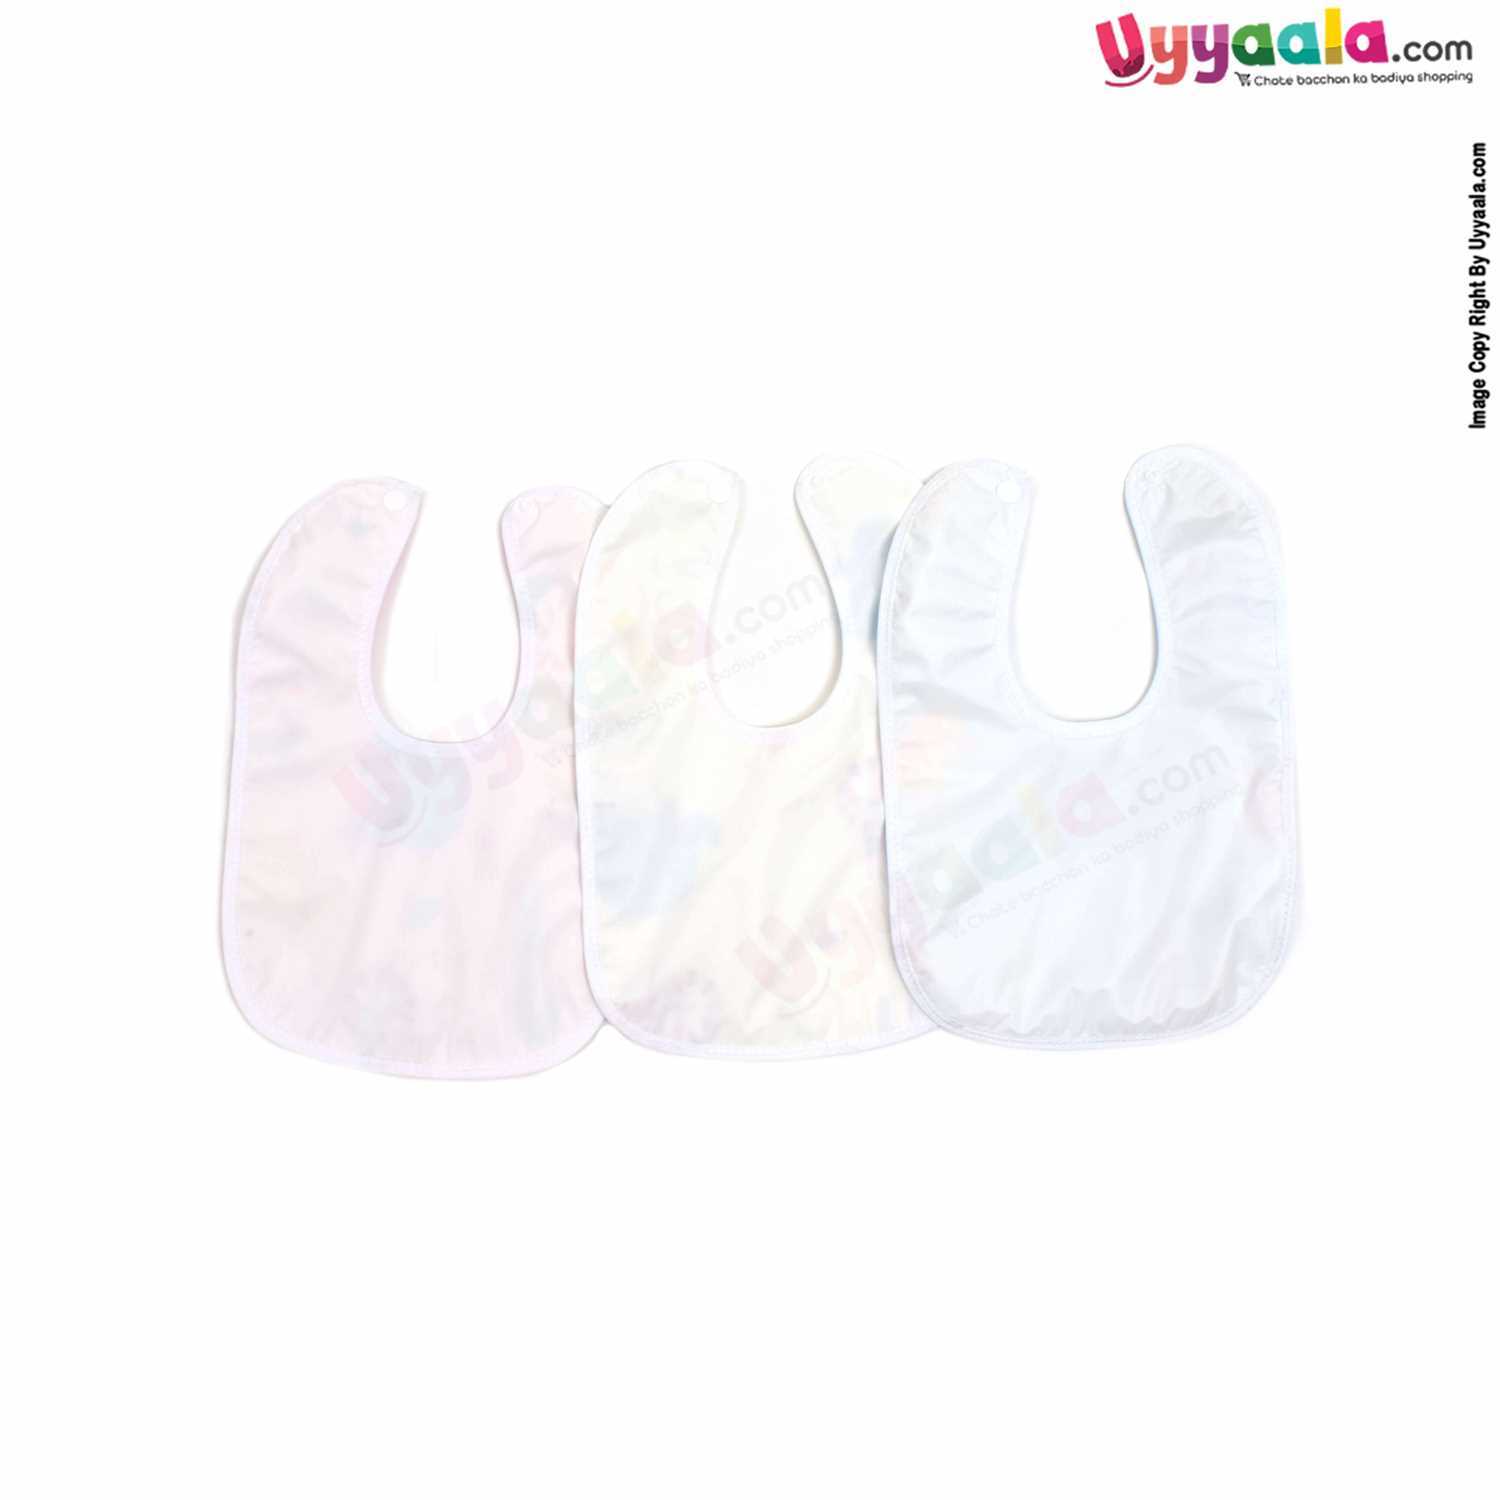 Baby Bib One Side Velvet & Another Side PVC with Animals Print for Newborn Pack of 3,Size(28.5*19.5cm)- Multi color